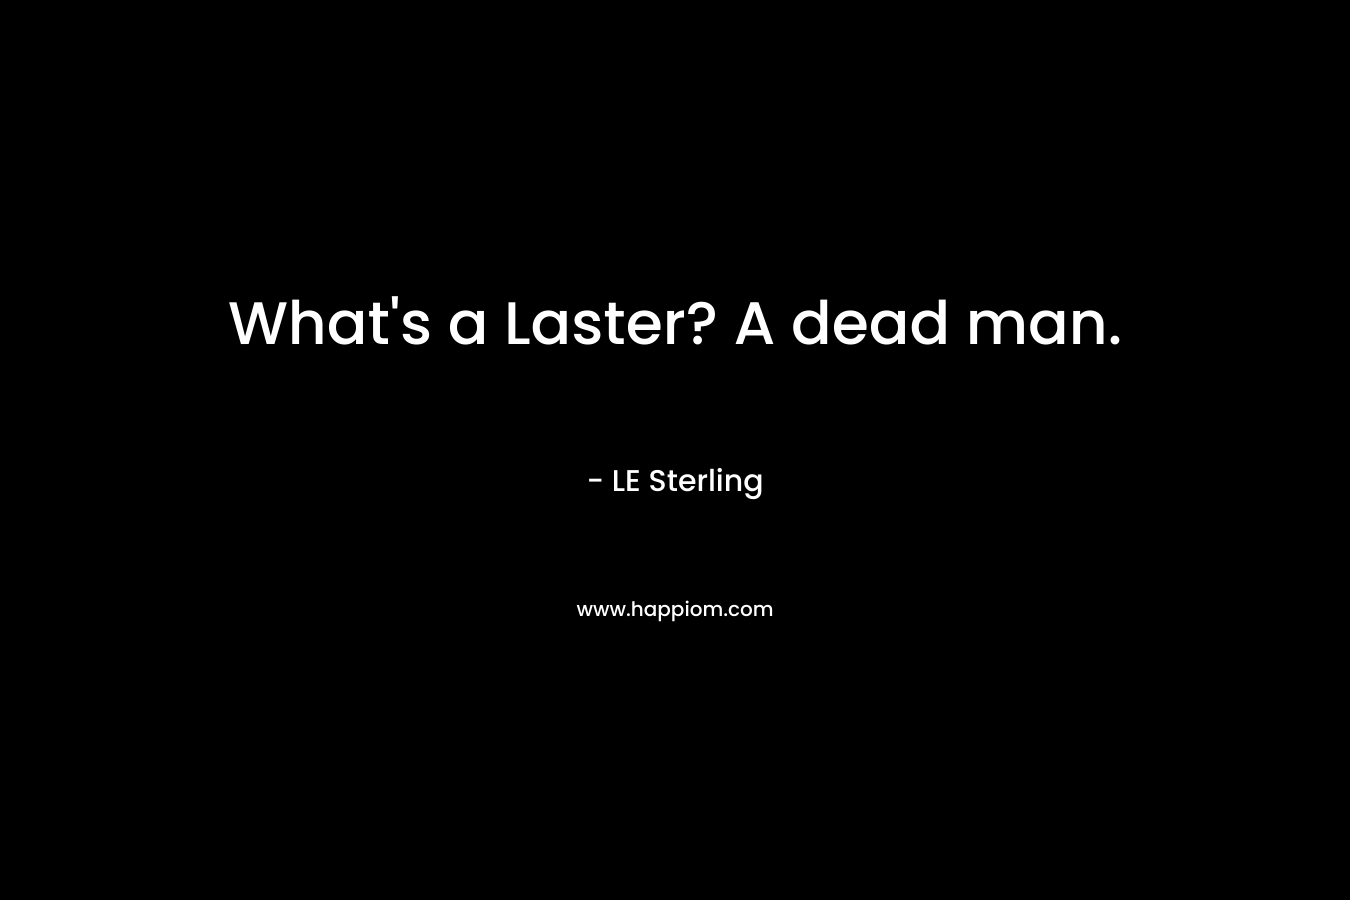 What’s a Laster? A dead man. – LE Sterling